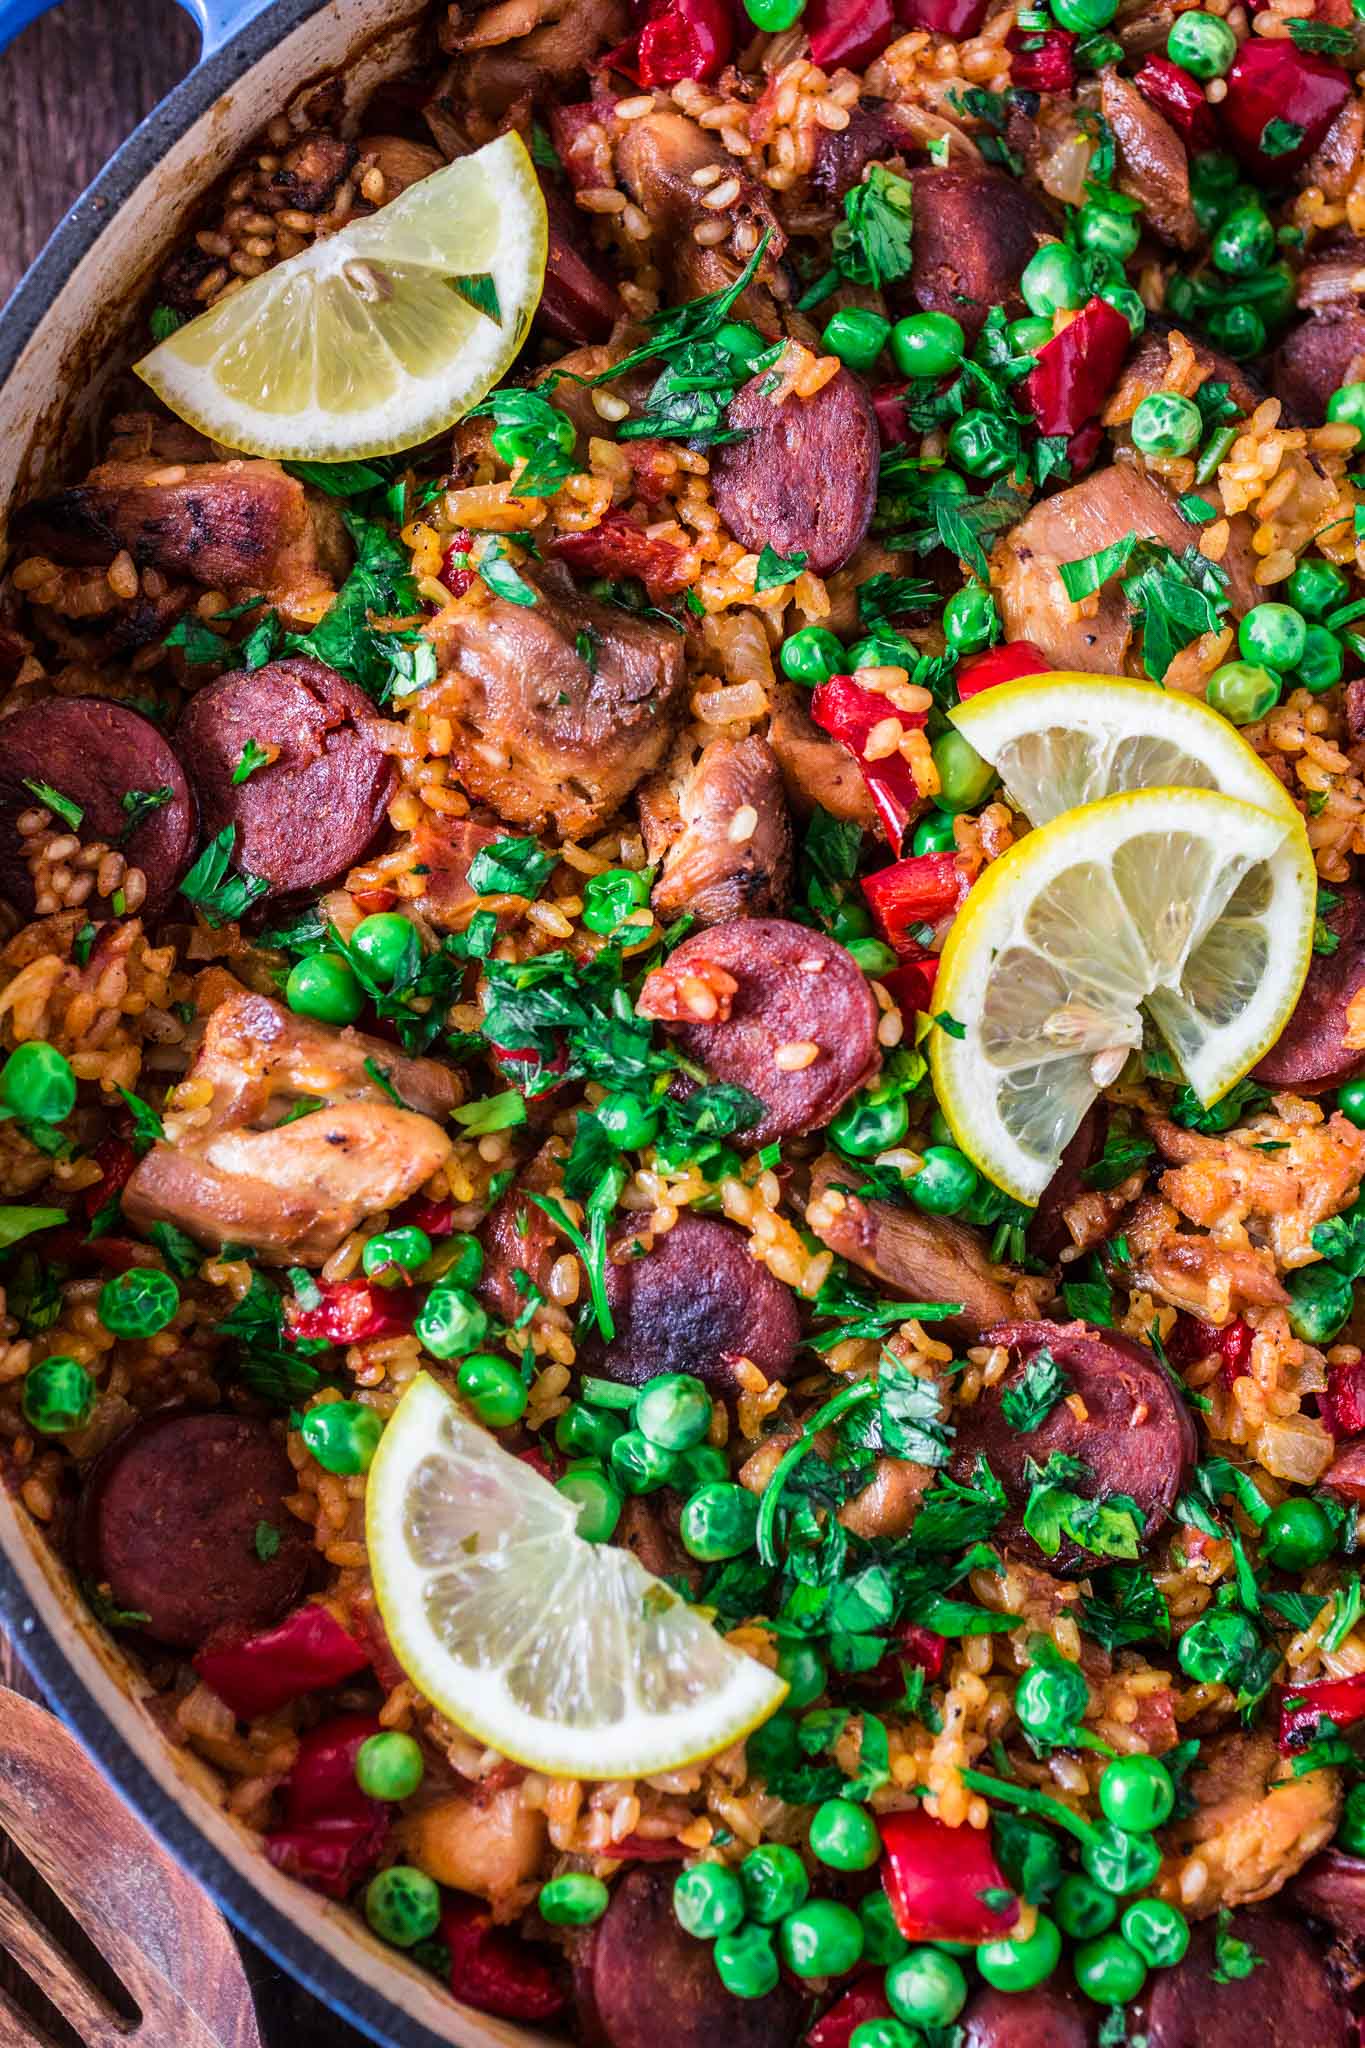 Chicken and Chorizo Paella | www.oliviascuisine.com | A Chicken and Chorizo Paella might sound like a very ambitious project, but once you realize how easy and quick it is, you will be making it over and over again. Pair it with a bottle of Garnacha Wine and you’re all set for success!